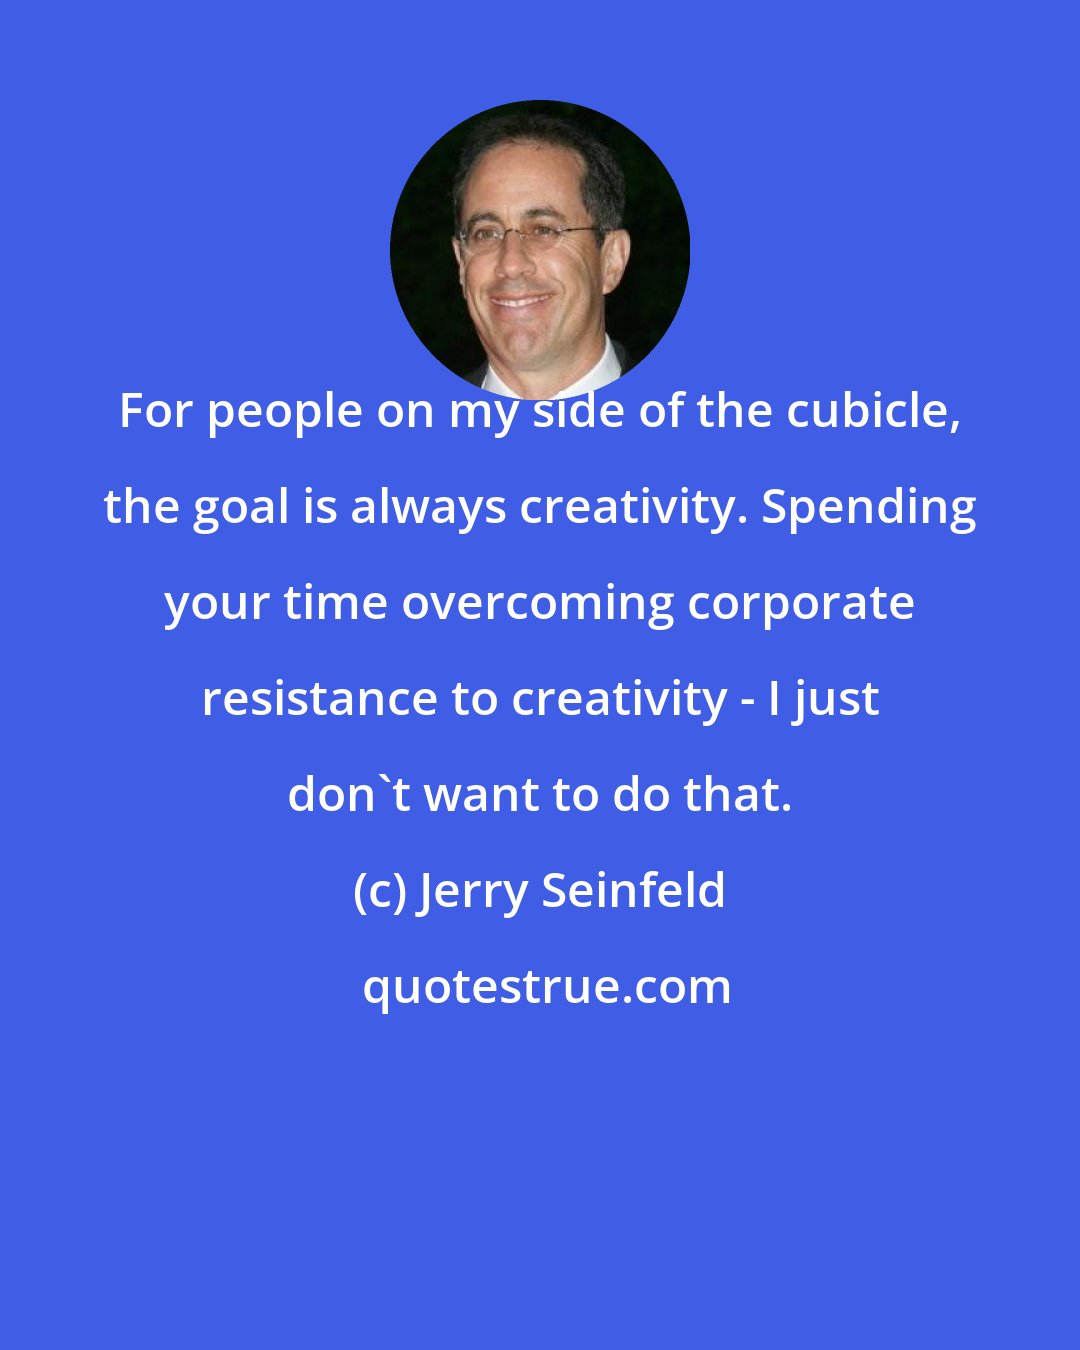 Jerry Seinfeld: For people on my side of the cubicle, the goal is always creativity. Spending your time overcoming corporate resistance to creativity - I just don't want to do that.